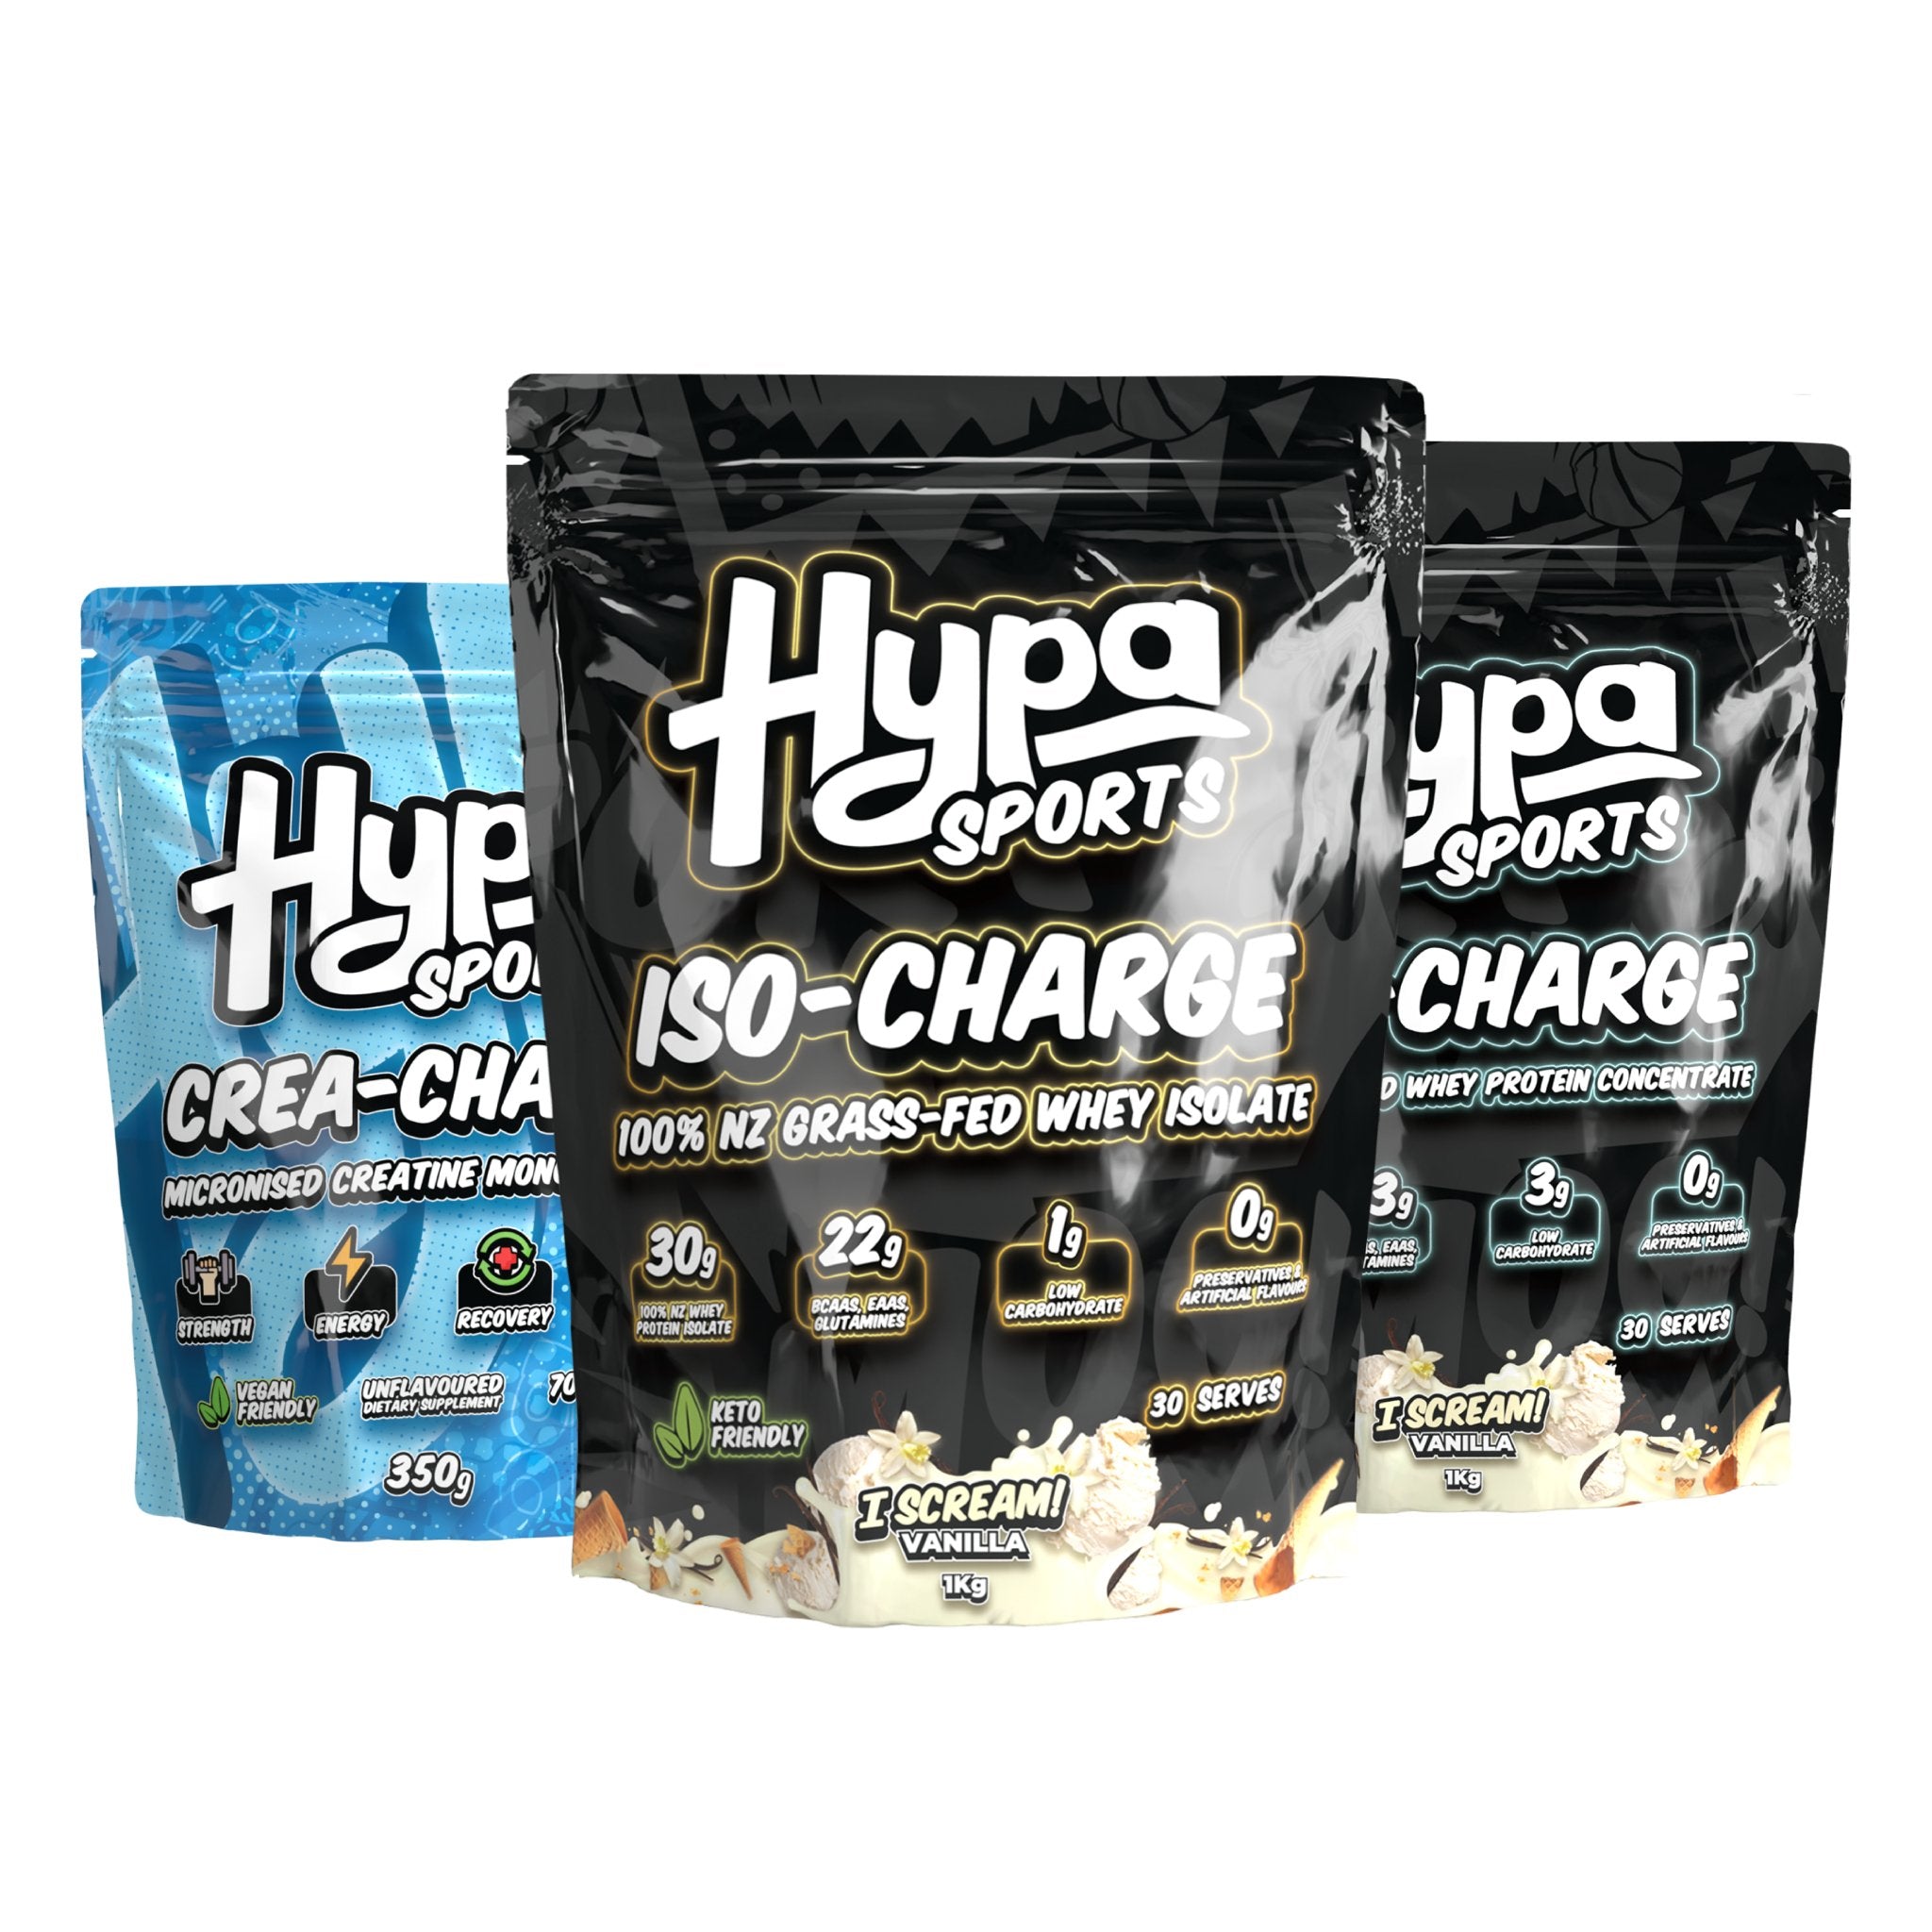 Hypa Iso-Charge + Hypa Pro-Charge + Hypa Crea-Charge - Hypa Christchurch - Hypa Sports